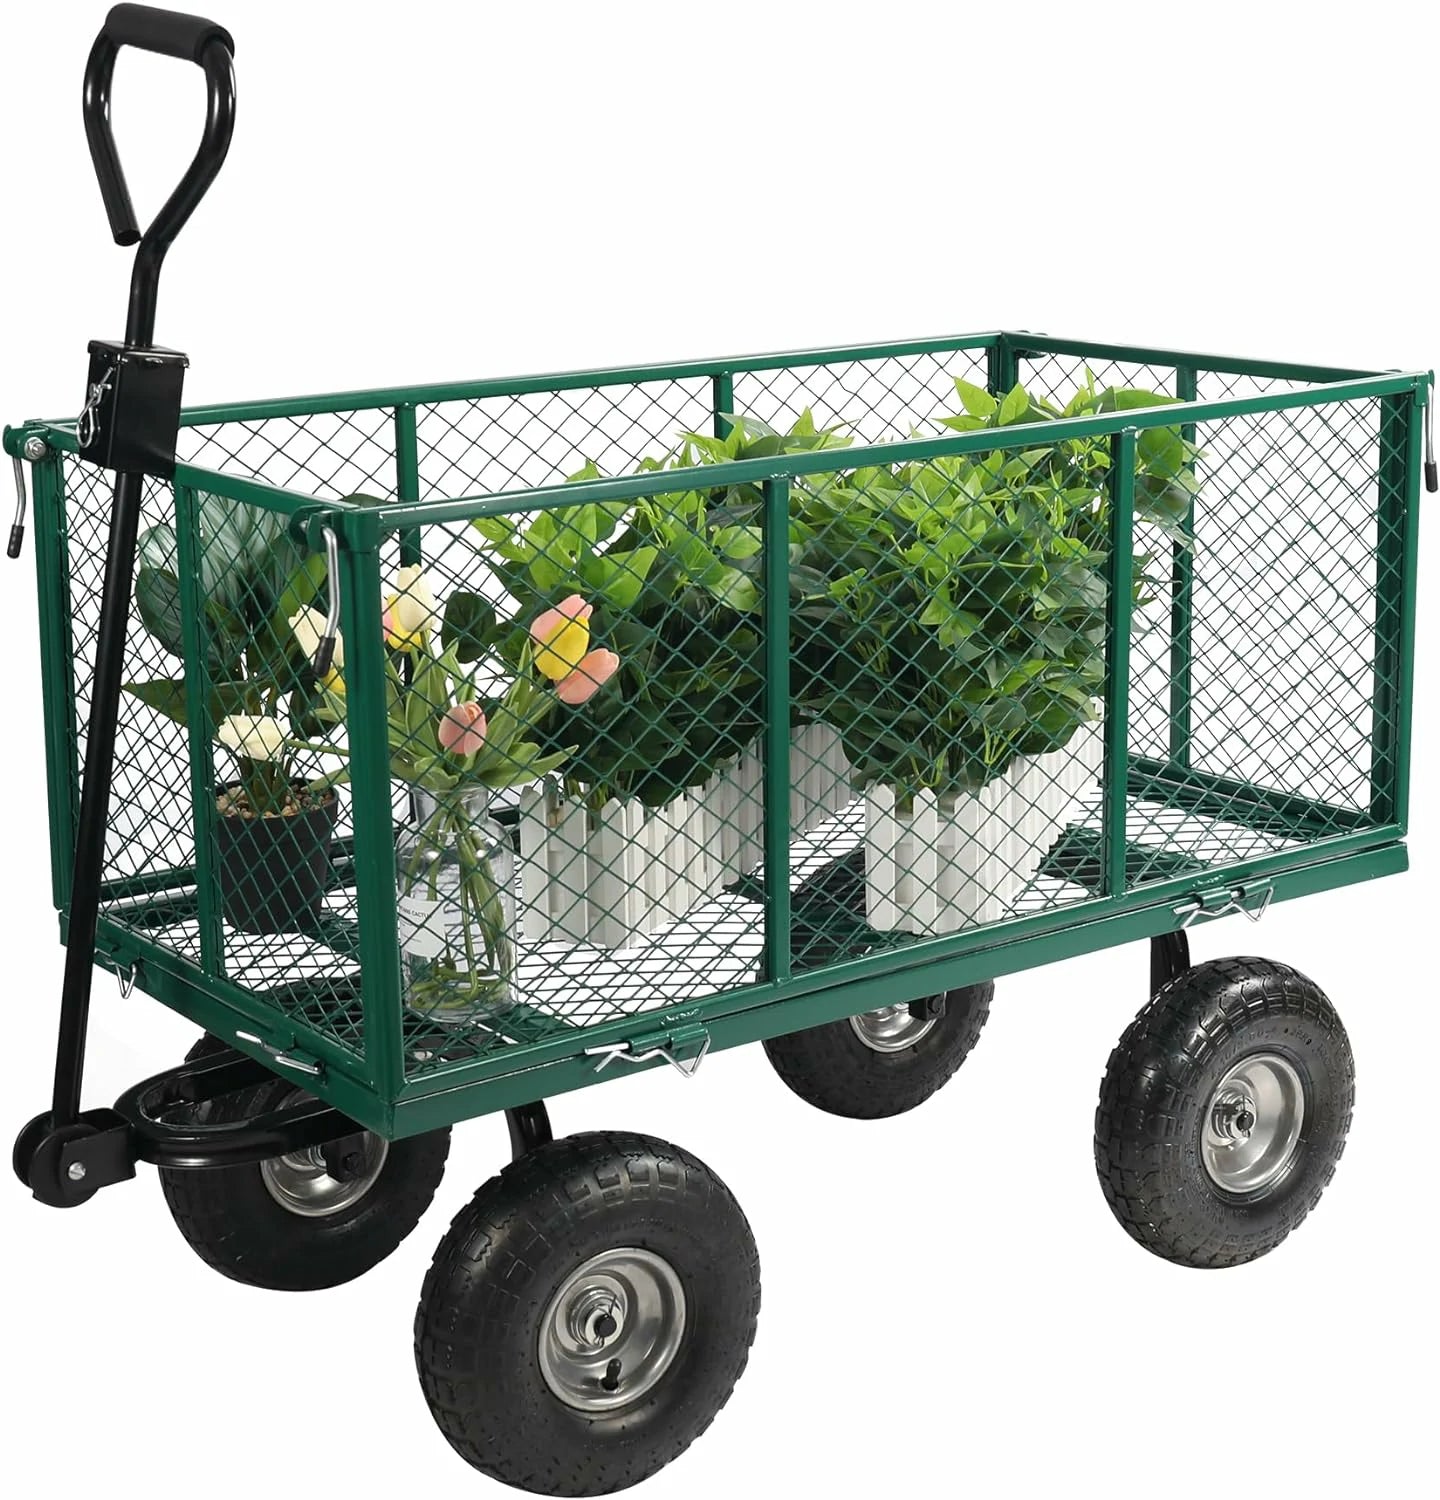 REDCAMP Garden Wagons Carts Heavy Duty Pullable